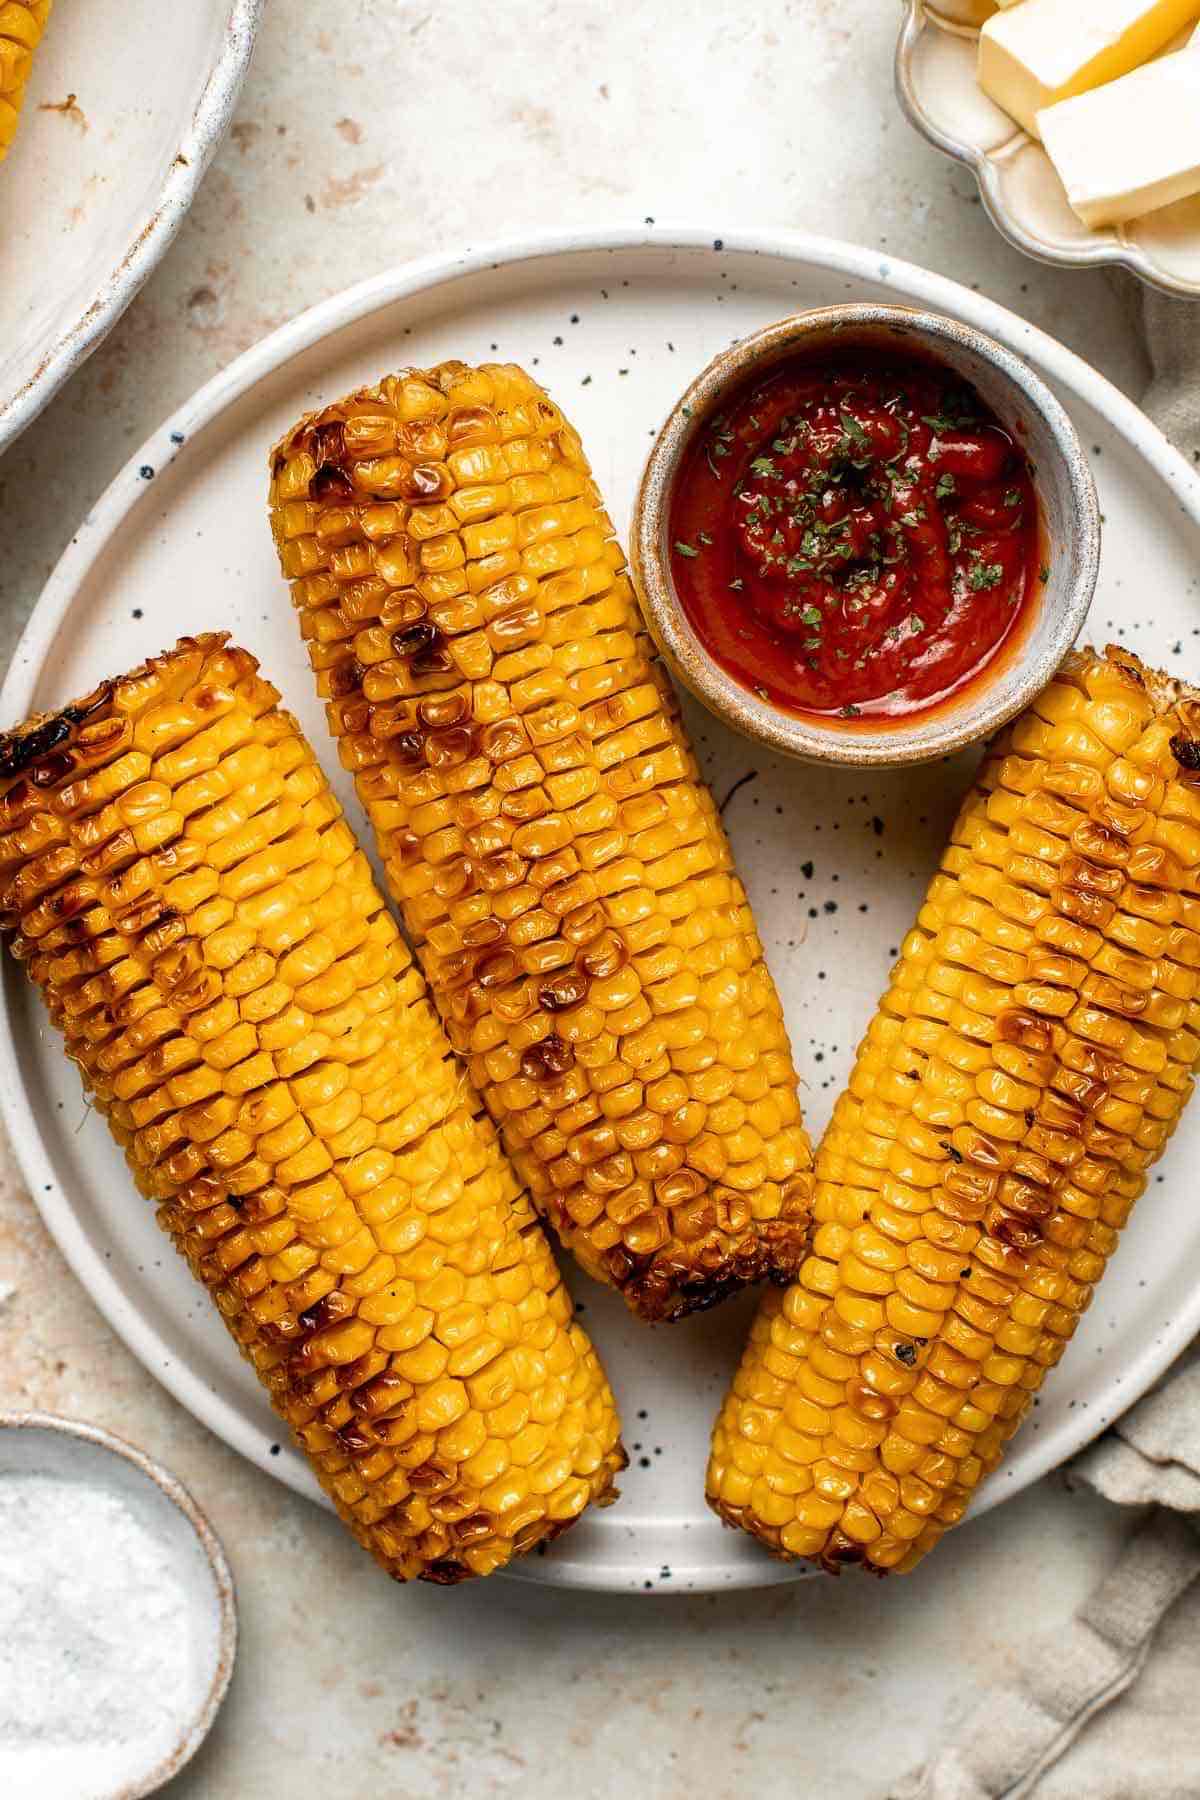 Oven roasted corn with tomato sauce on ceramic plate.